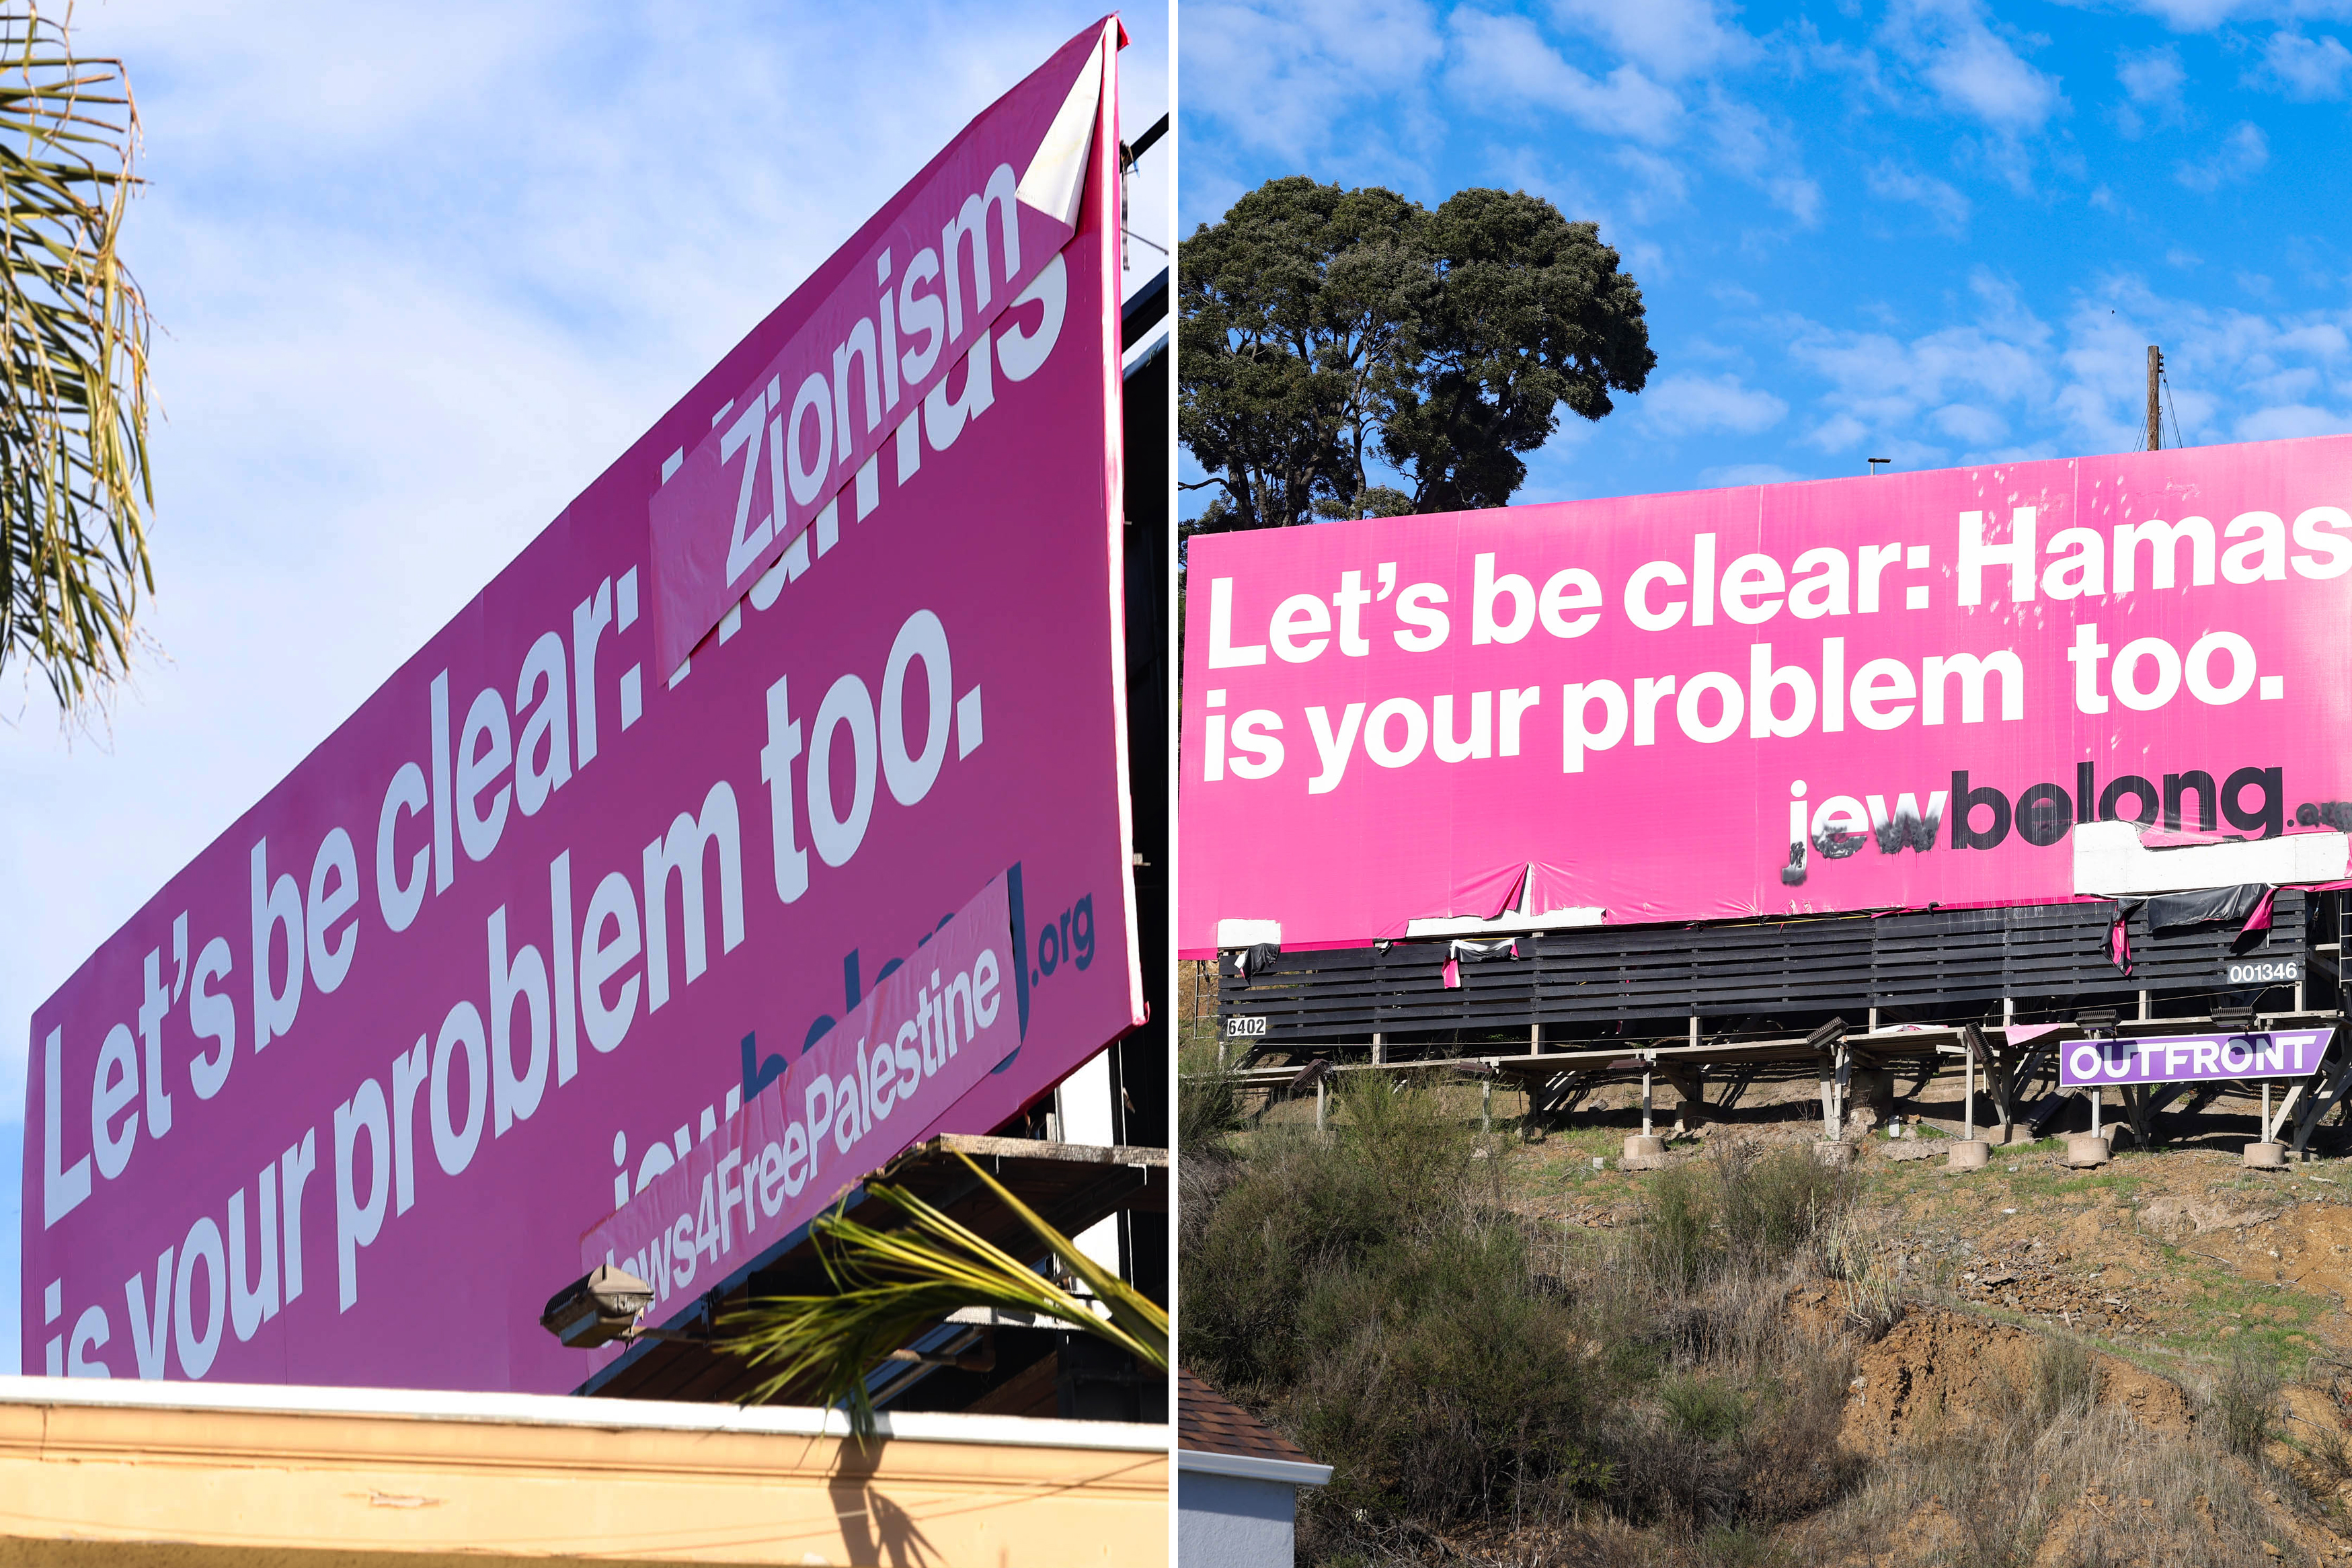 A side by side photo of defaced billboard reading “Lets be clear: Hamas is your problem too. FREE PALESTINE!!” with the the phrase Hamas crossed and the original billboard reading “Let’s be clear: Hamas is your problem too. Jewbelong.org”.